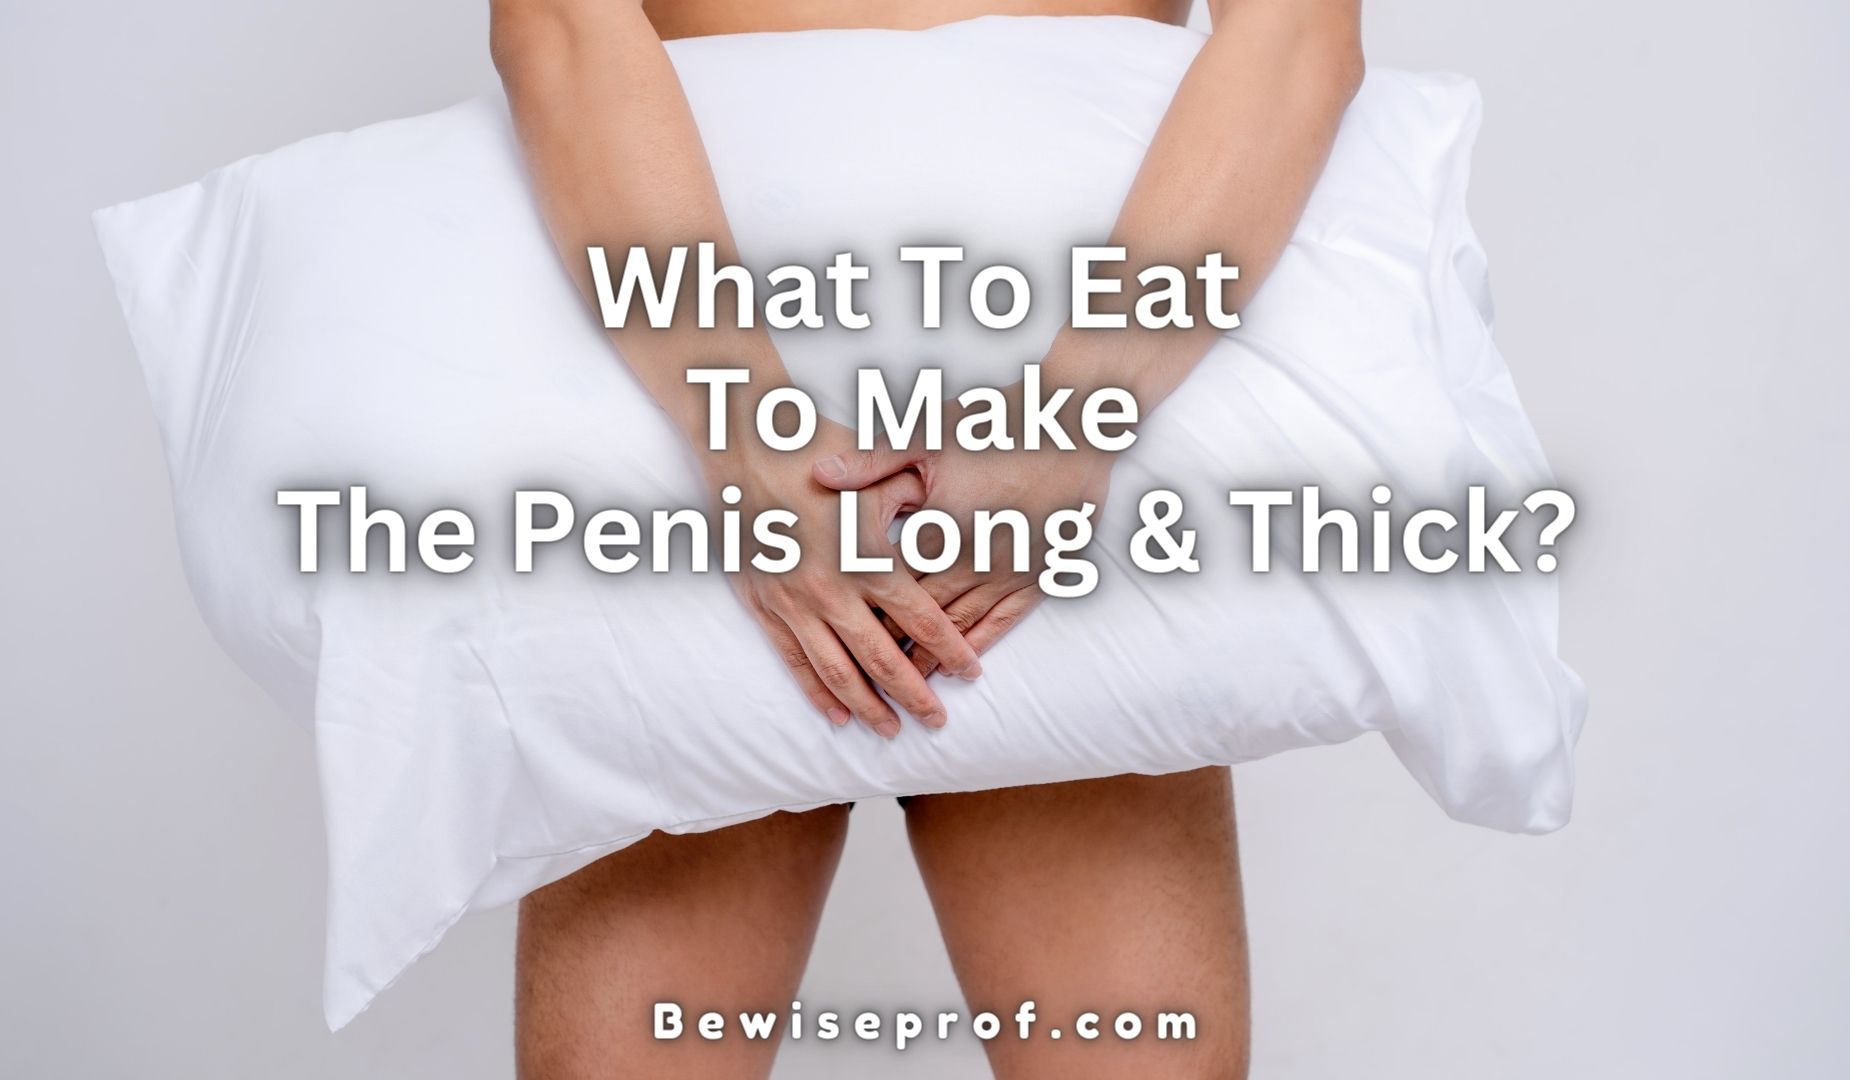 What To Eat To Make The Penis Long And Thick?